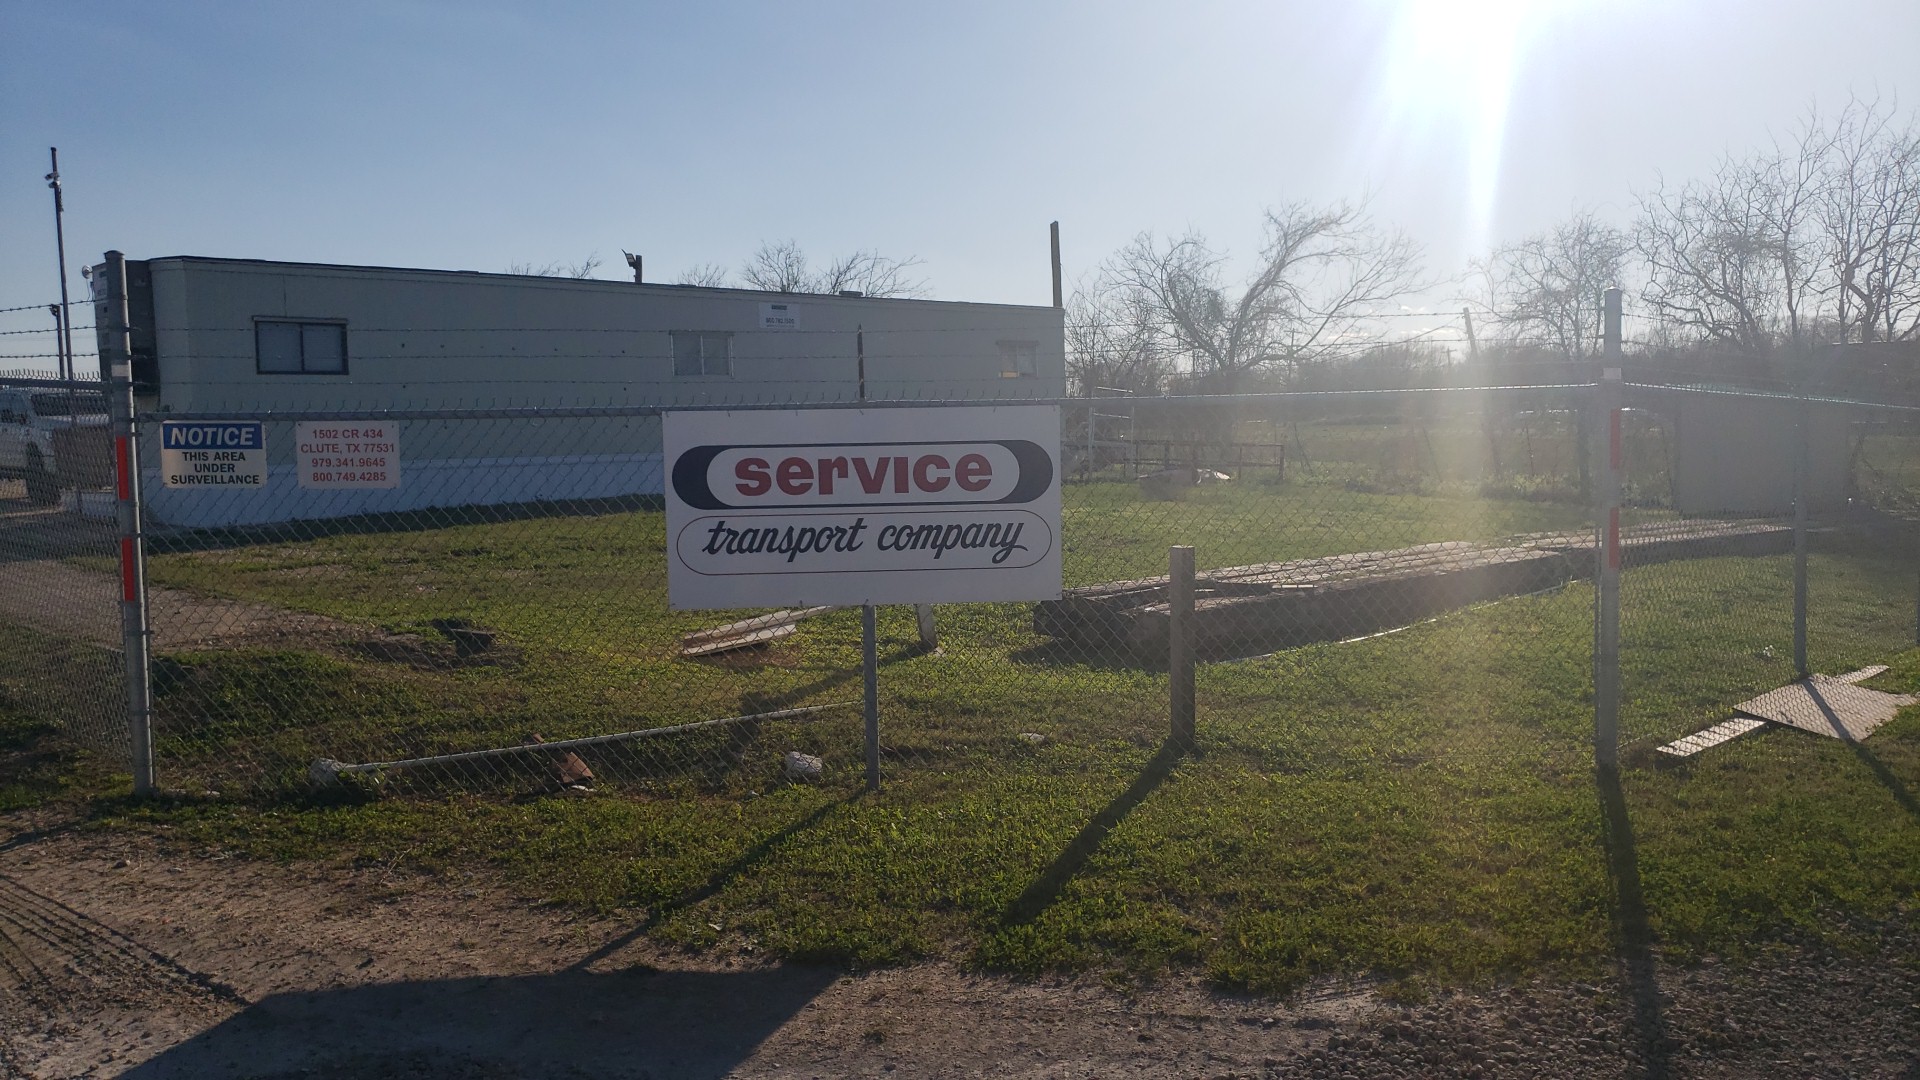 Service Transport Company - Freeport Terminal 1865 County Rd 434, Clute Texas 77531